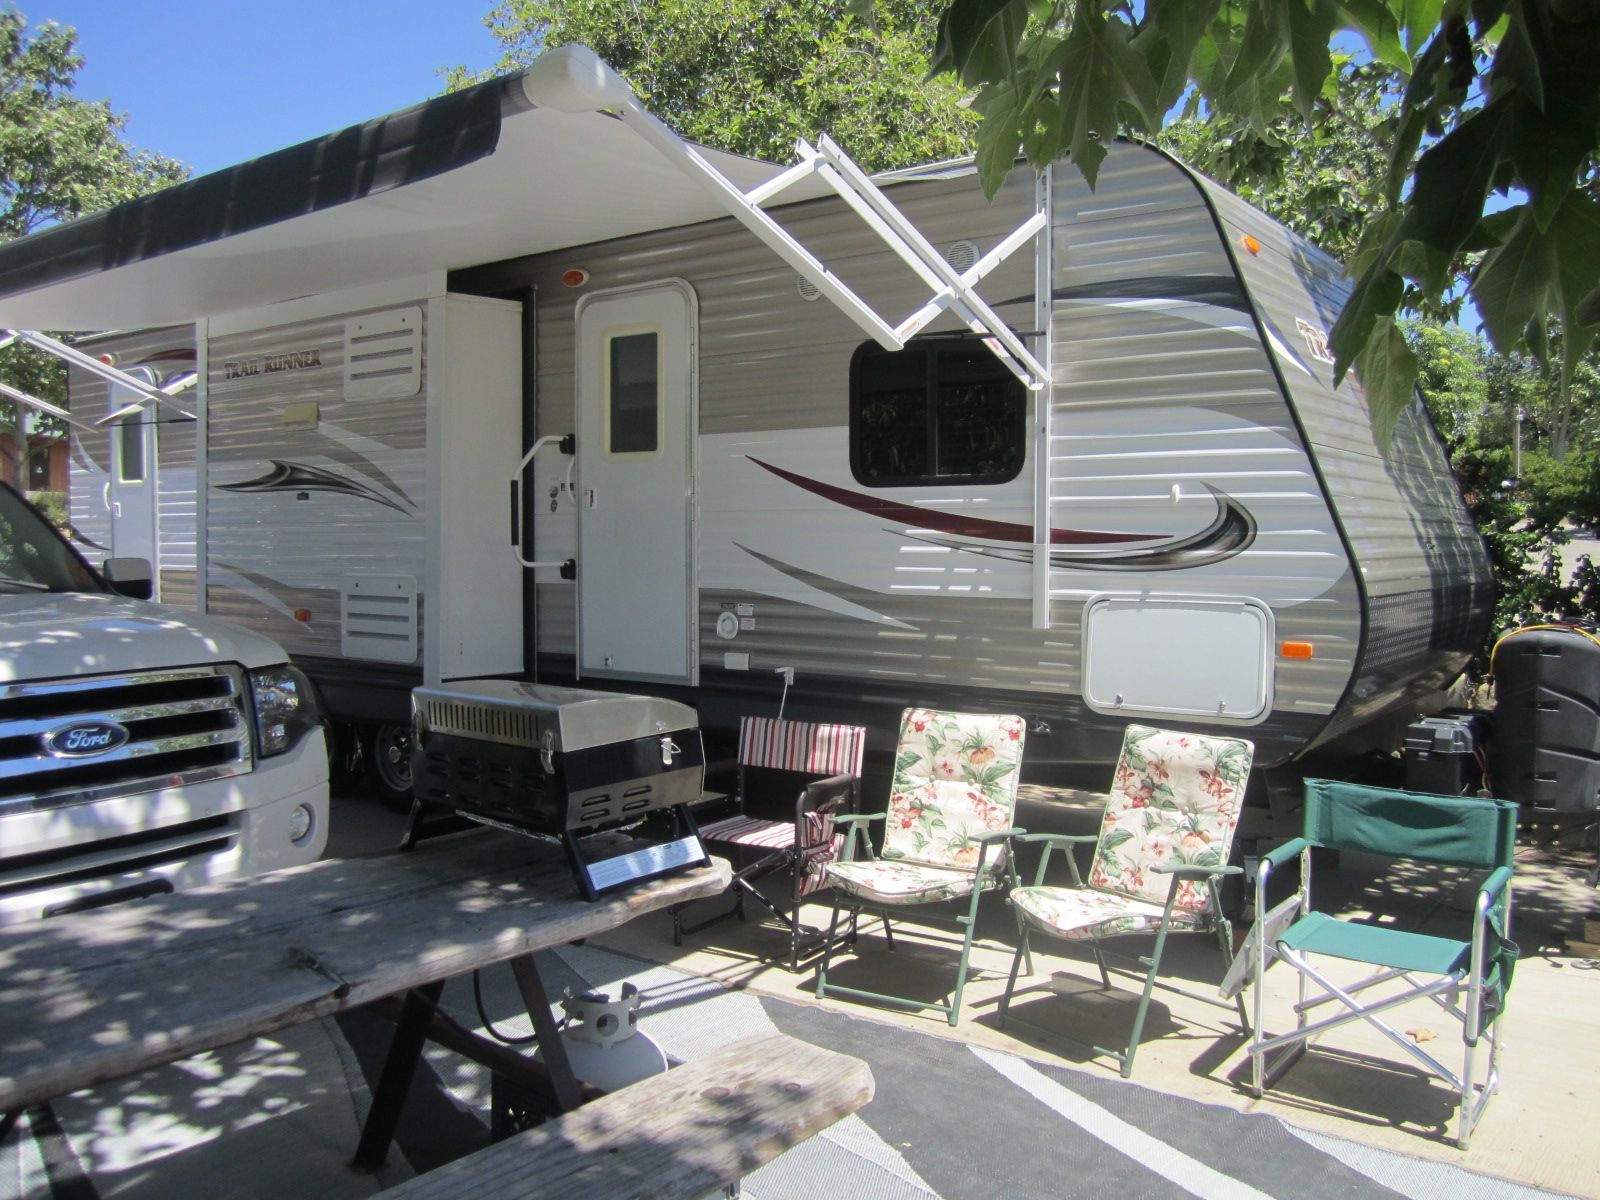 RV rental set up next to camping chairs